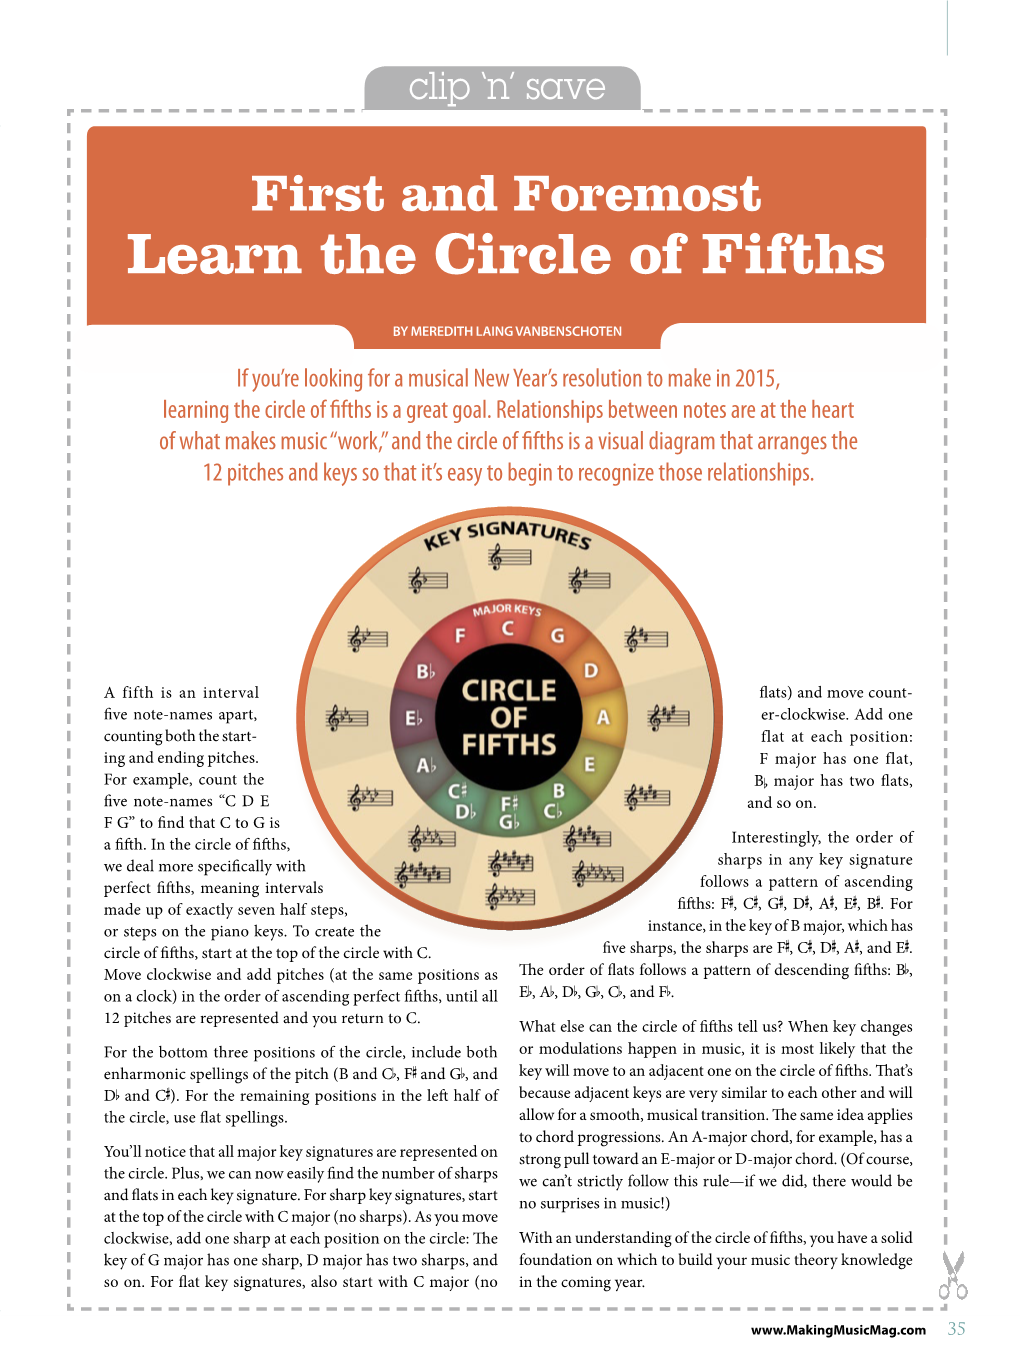 Learn the Circle of Fifths